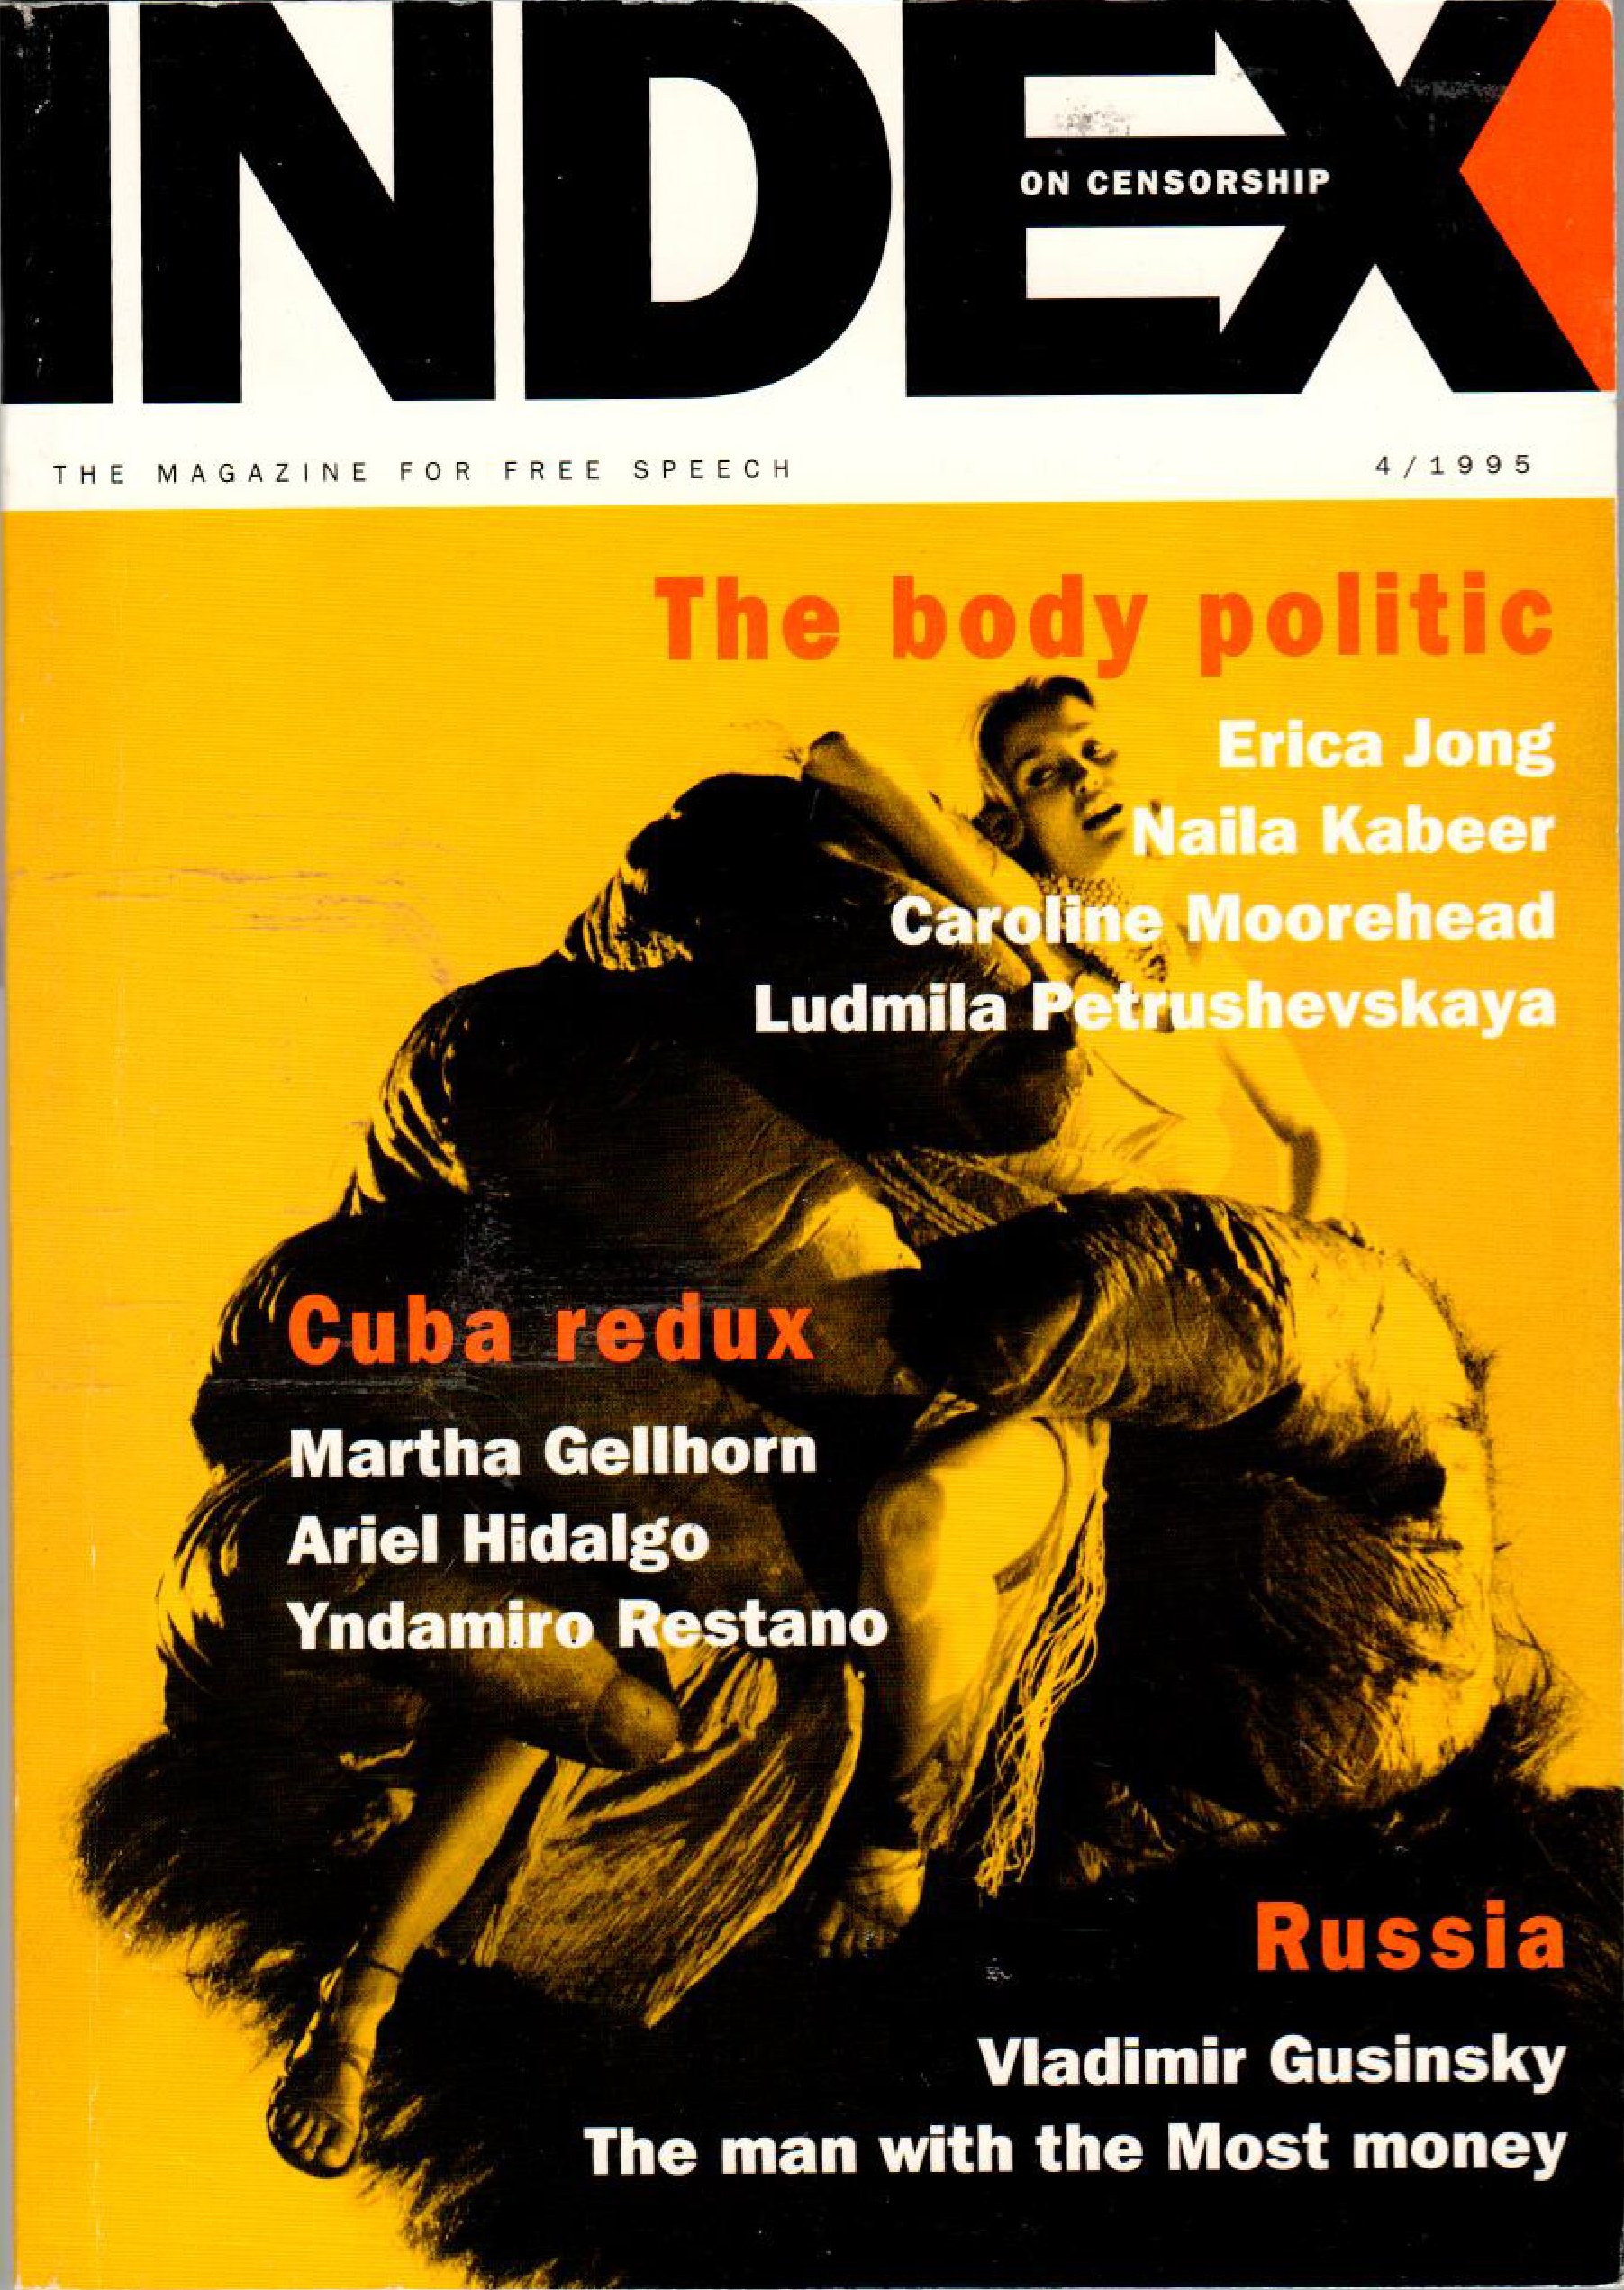 The body politic, the July 1995 edition of Index on Censorship magazine